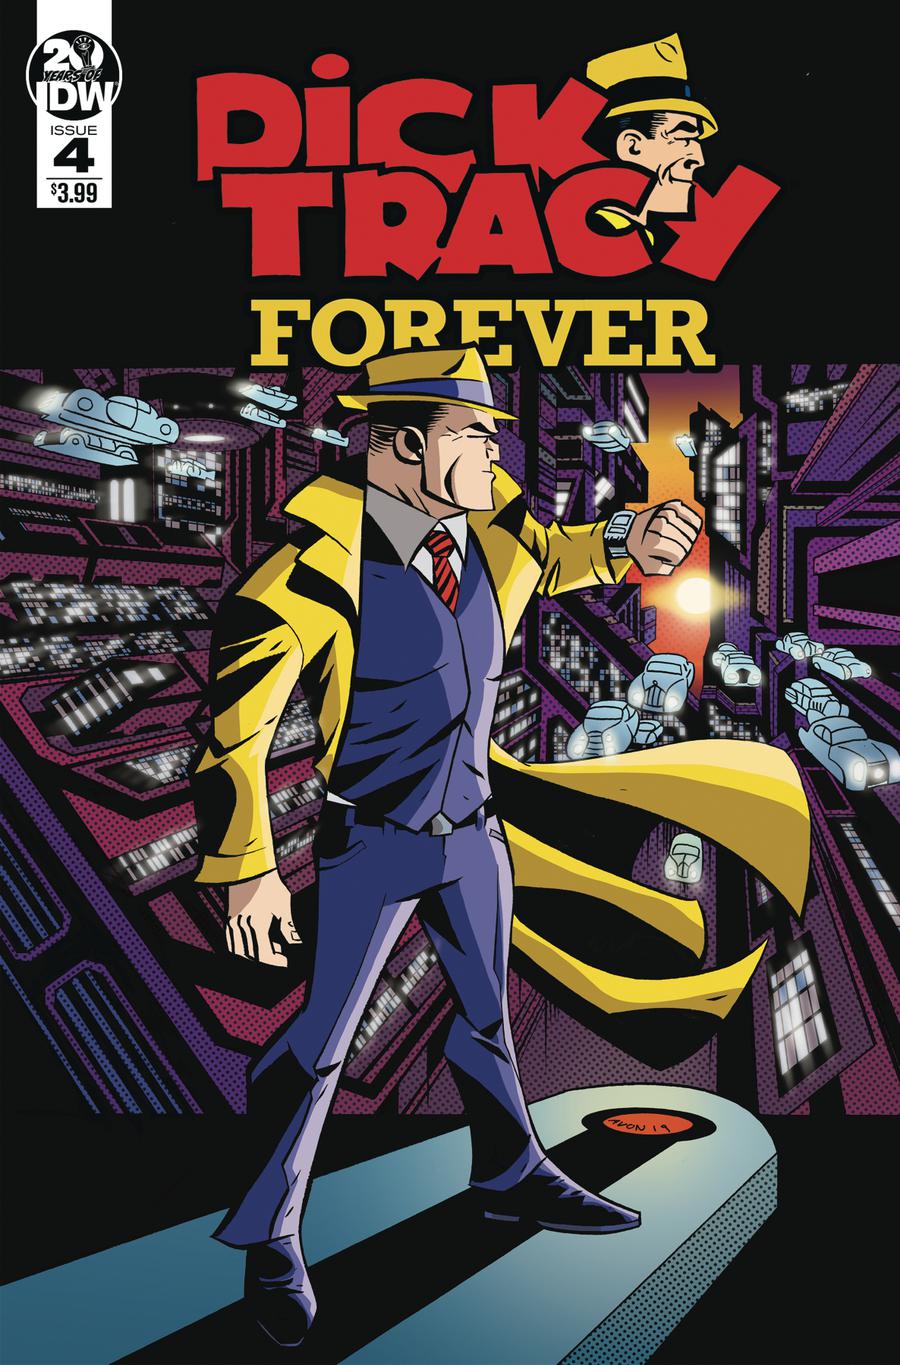 Dick Tracy Forever #4 Cover A Regular Michael Avon Oeming Cover